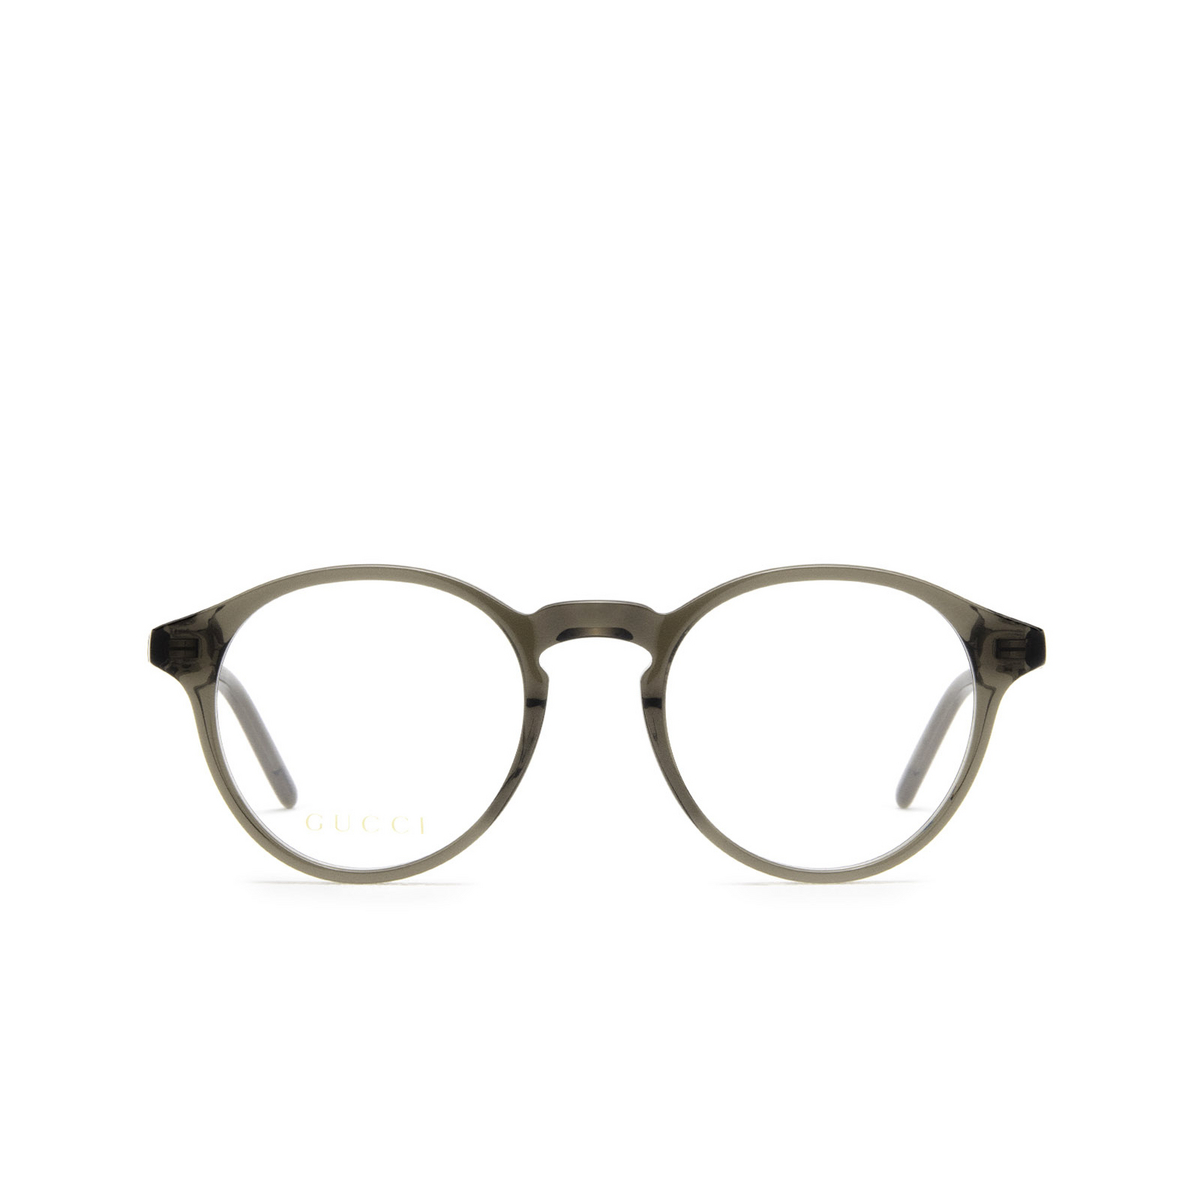 Gucci® Round Eyeglasses: GG1160O color Brown 002 - front view.